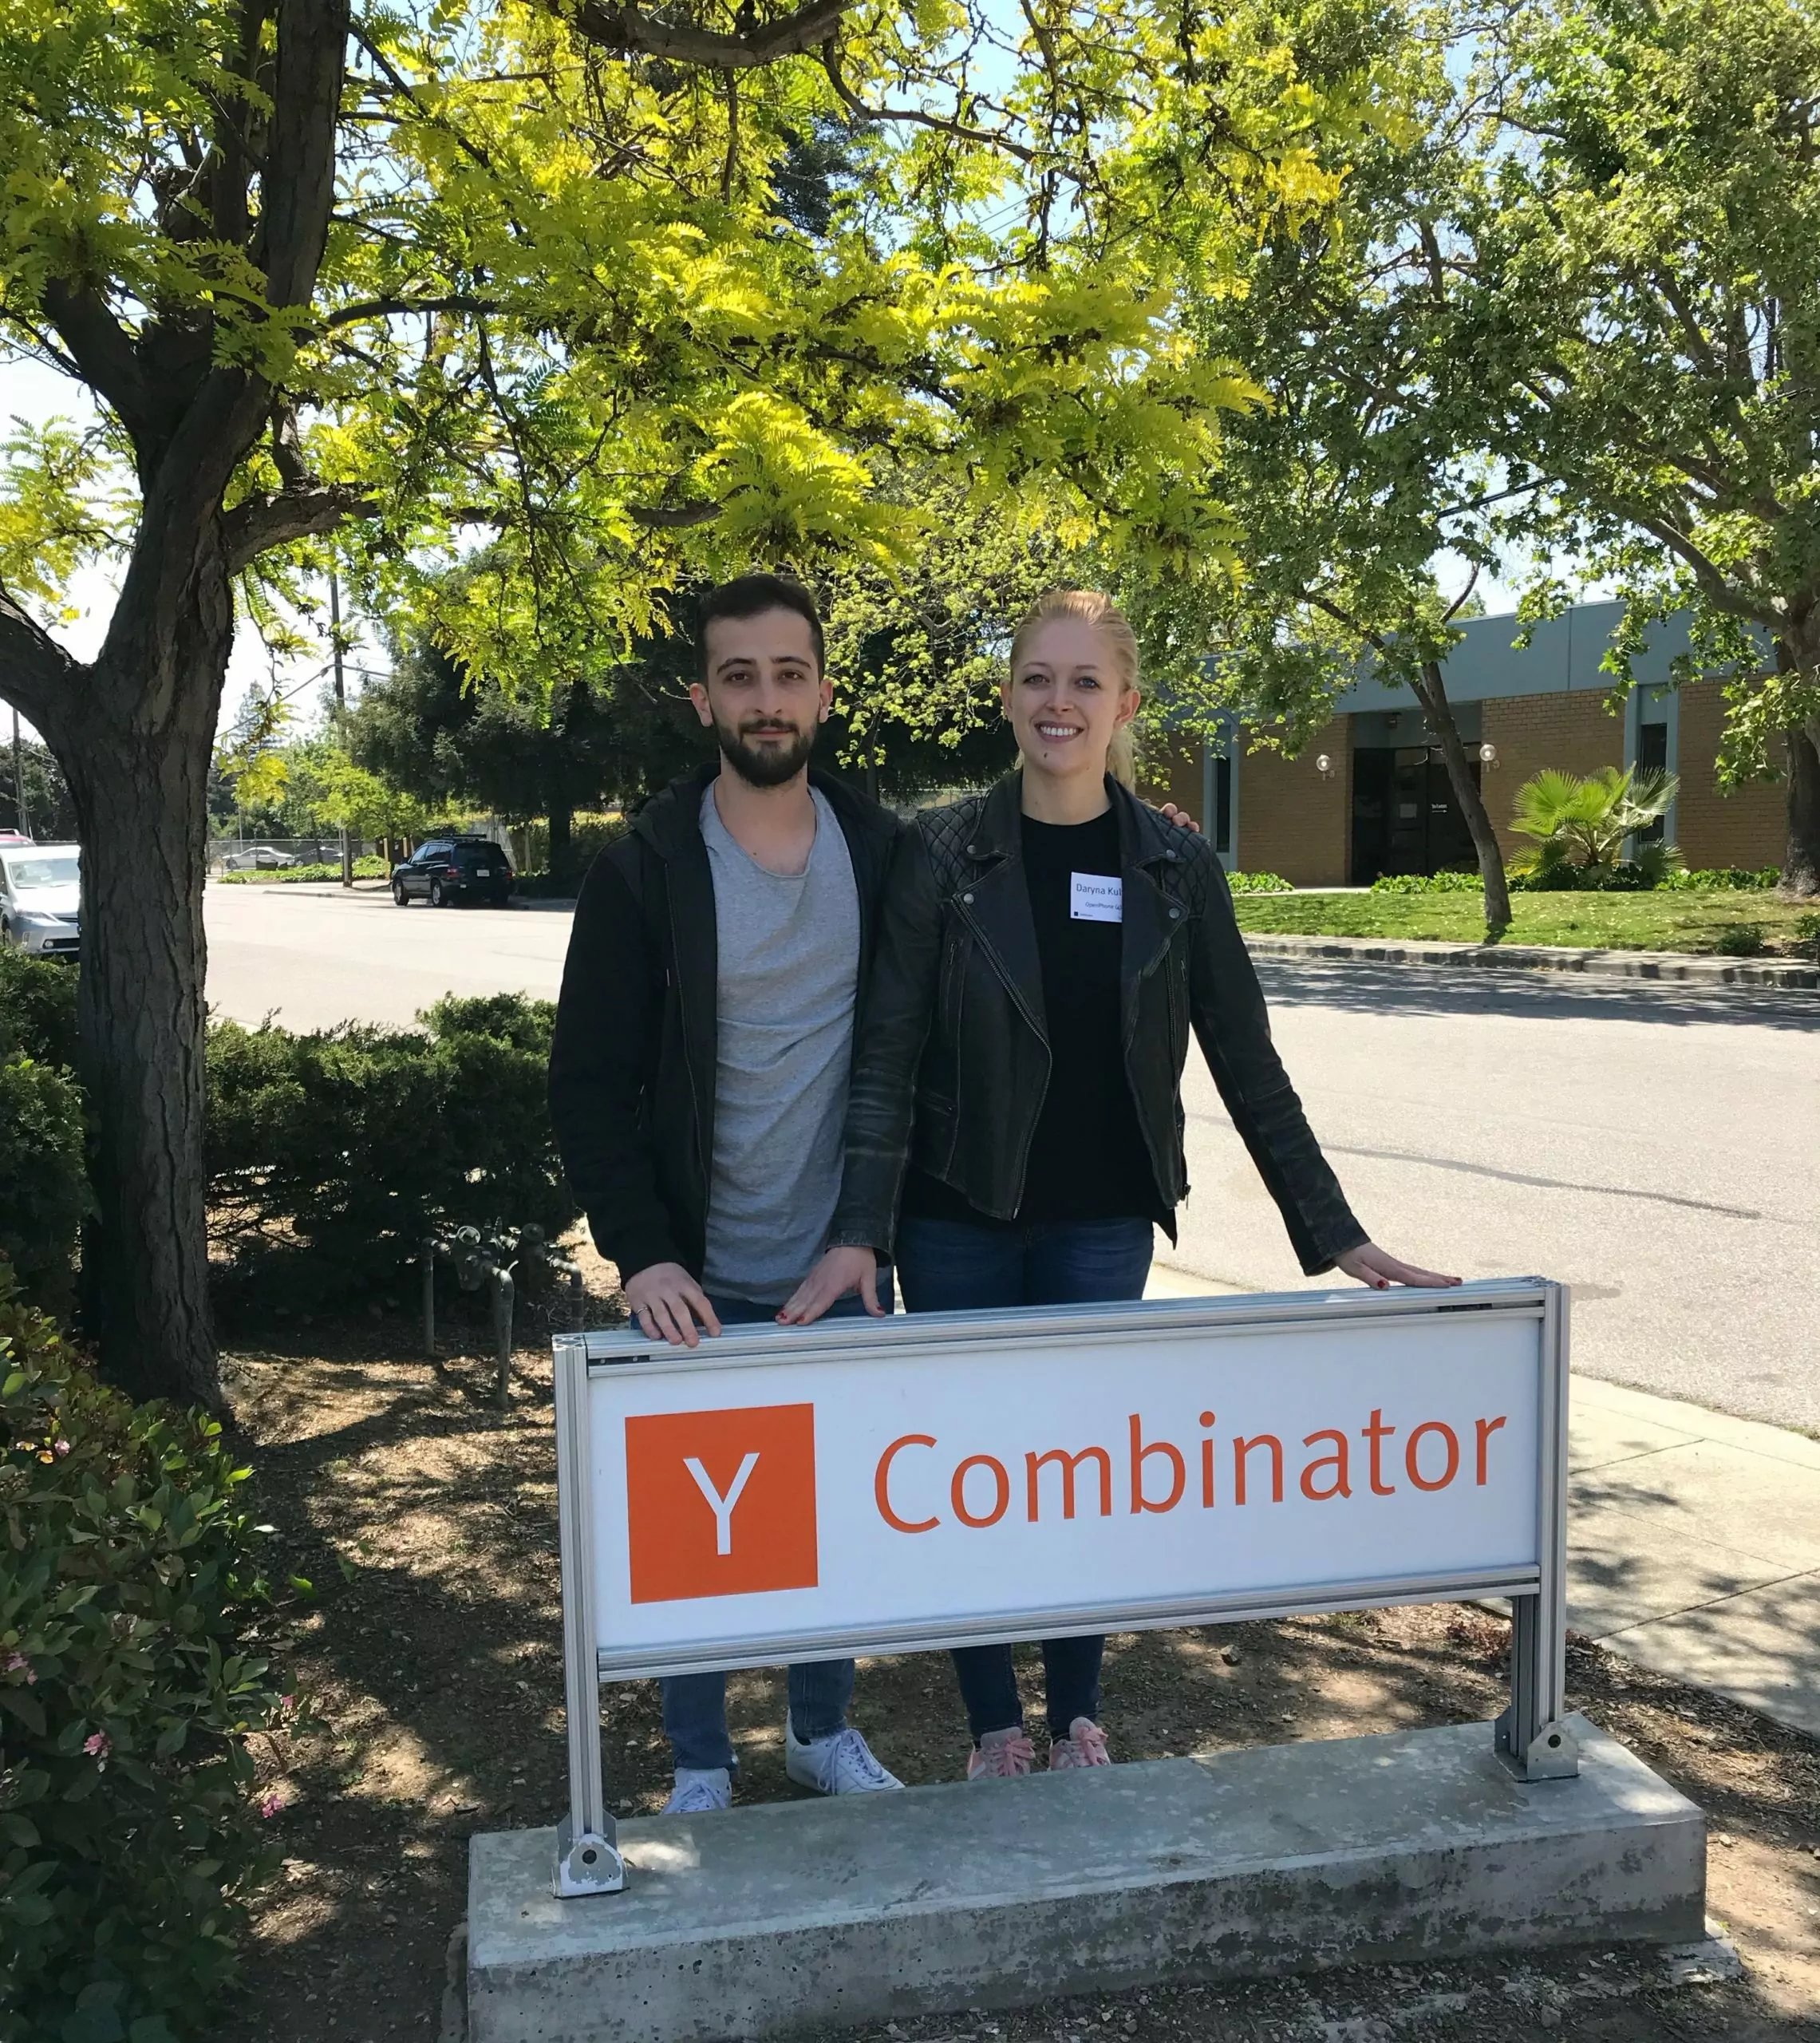 Daryna and Mahyar standing in front of Y Combinator sign